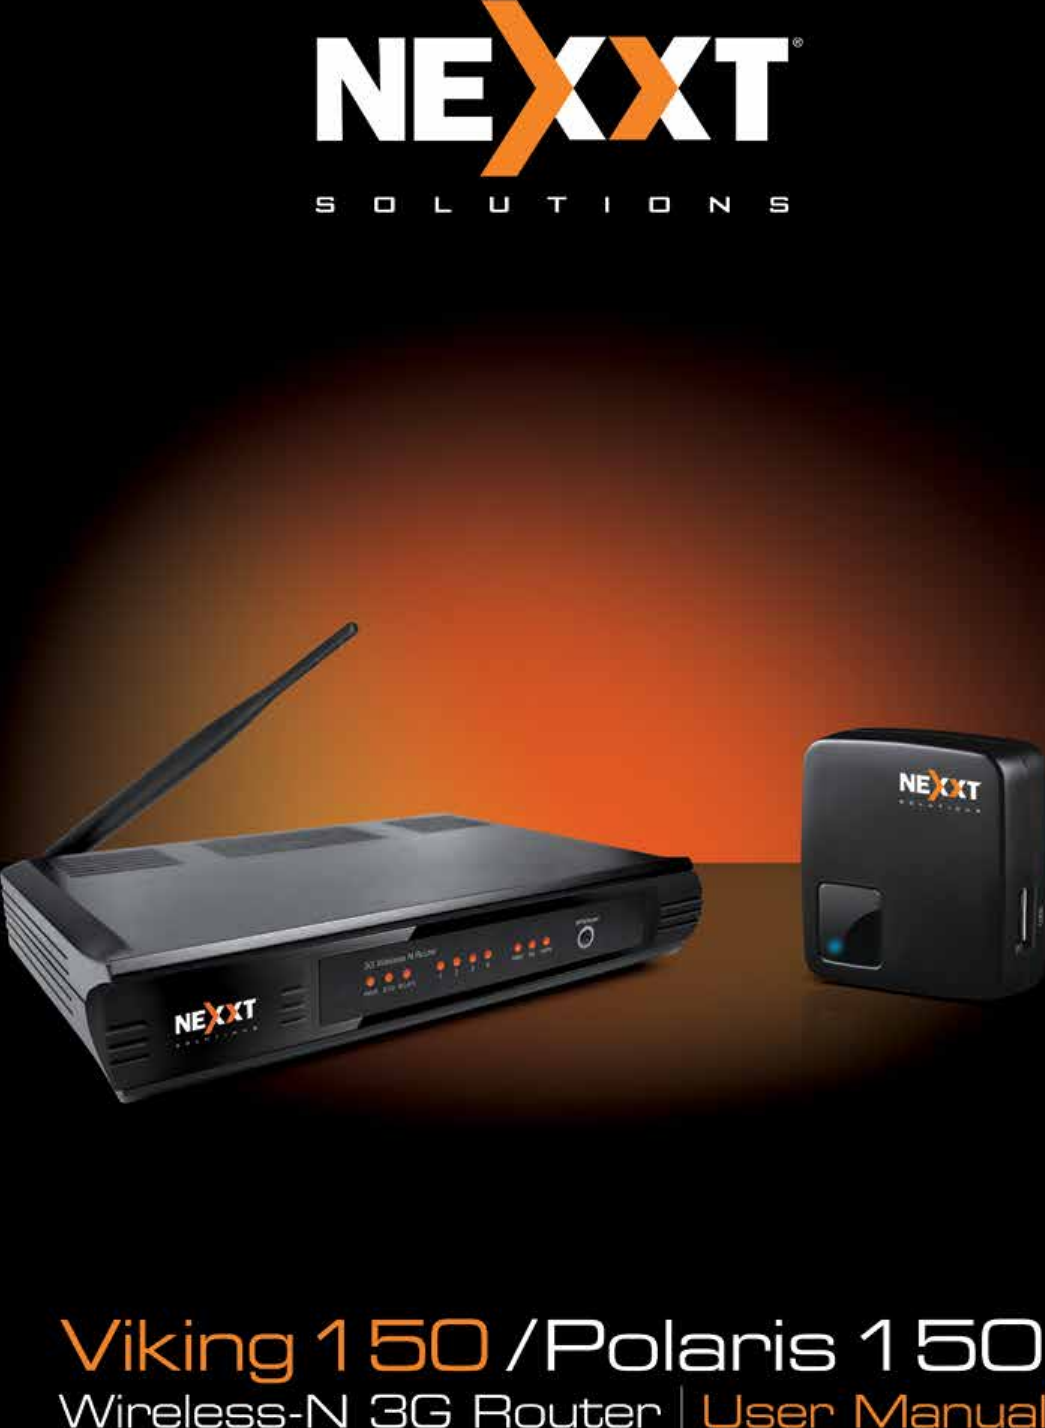 Nexxt Solutions – Wireless-N 3G router